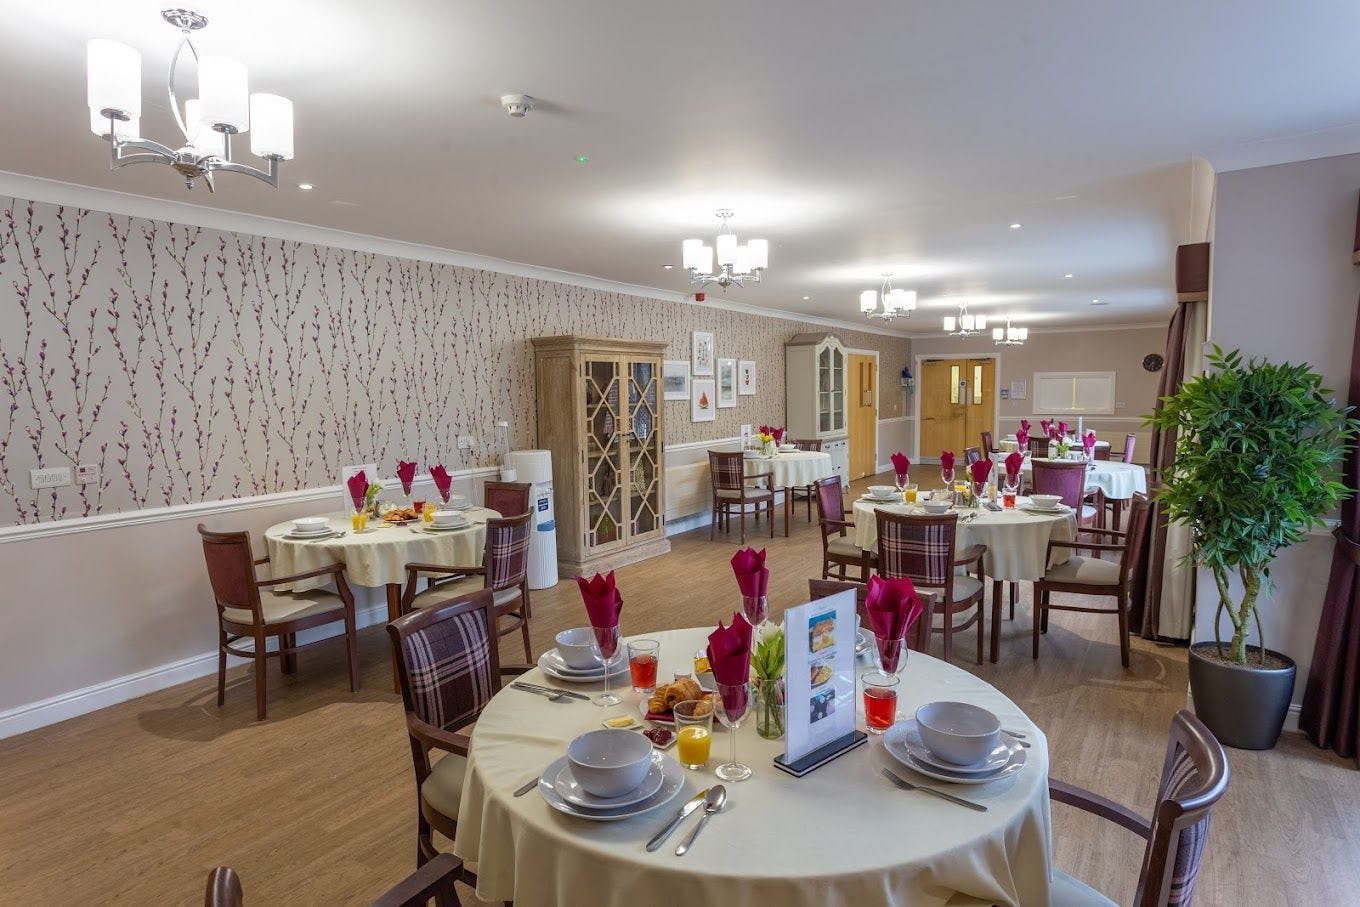 Dining Room at Monread Lodge Care Home in Hertfordshire, East of England